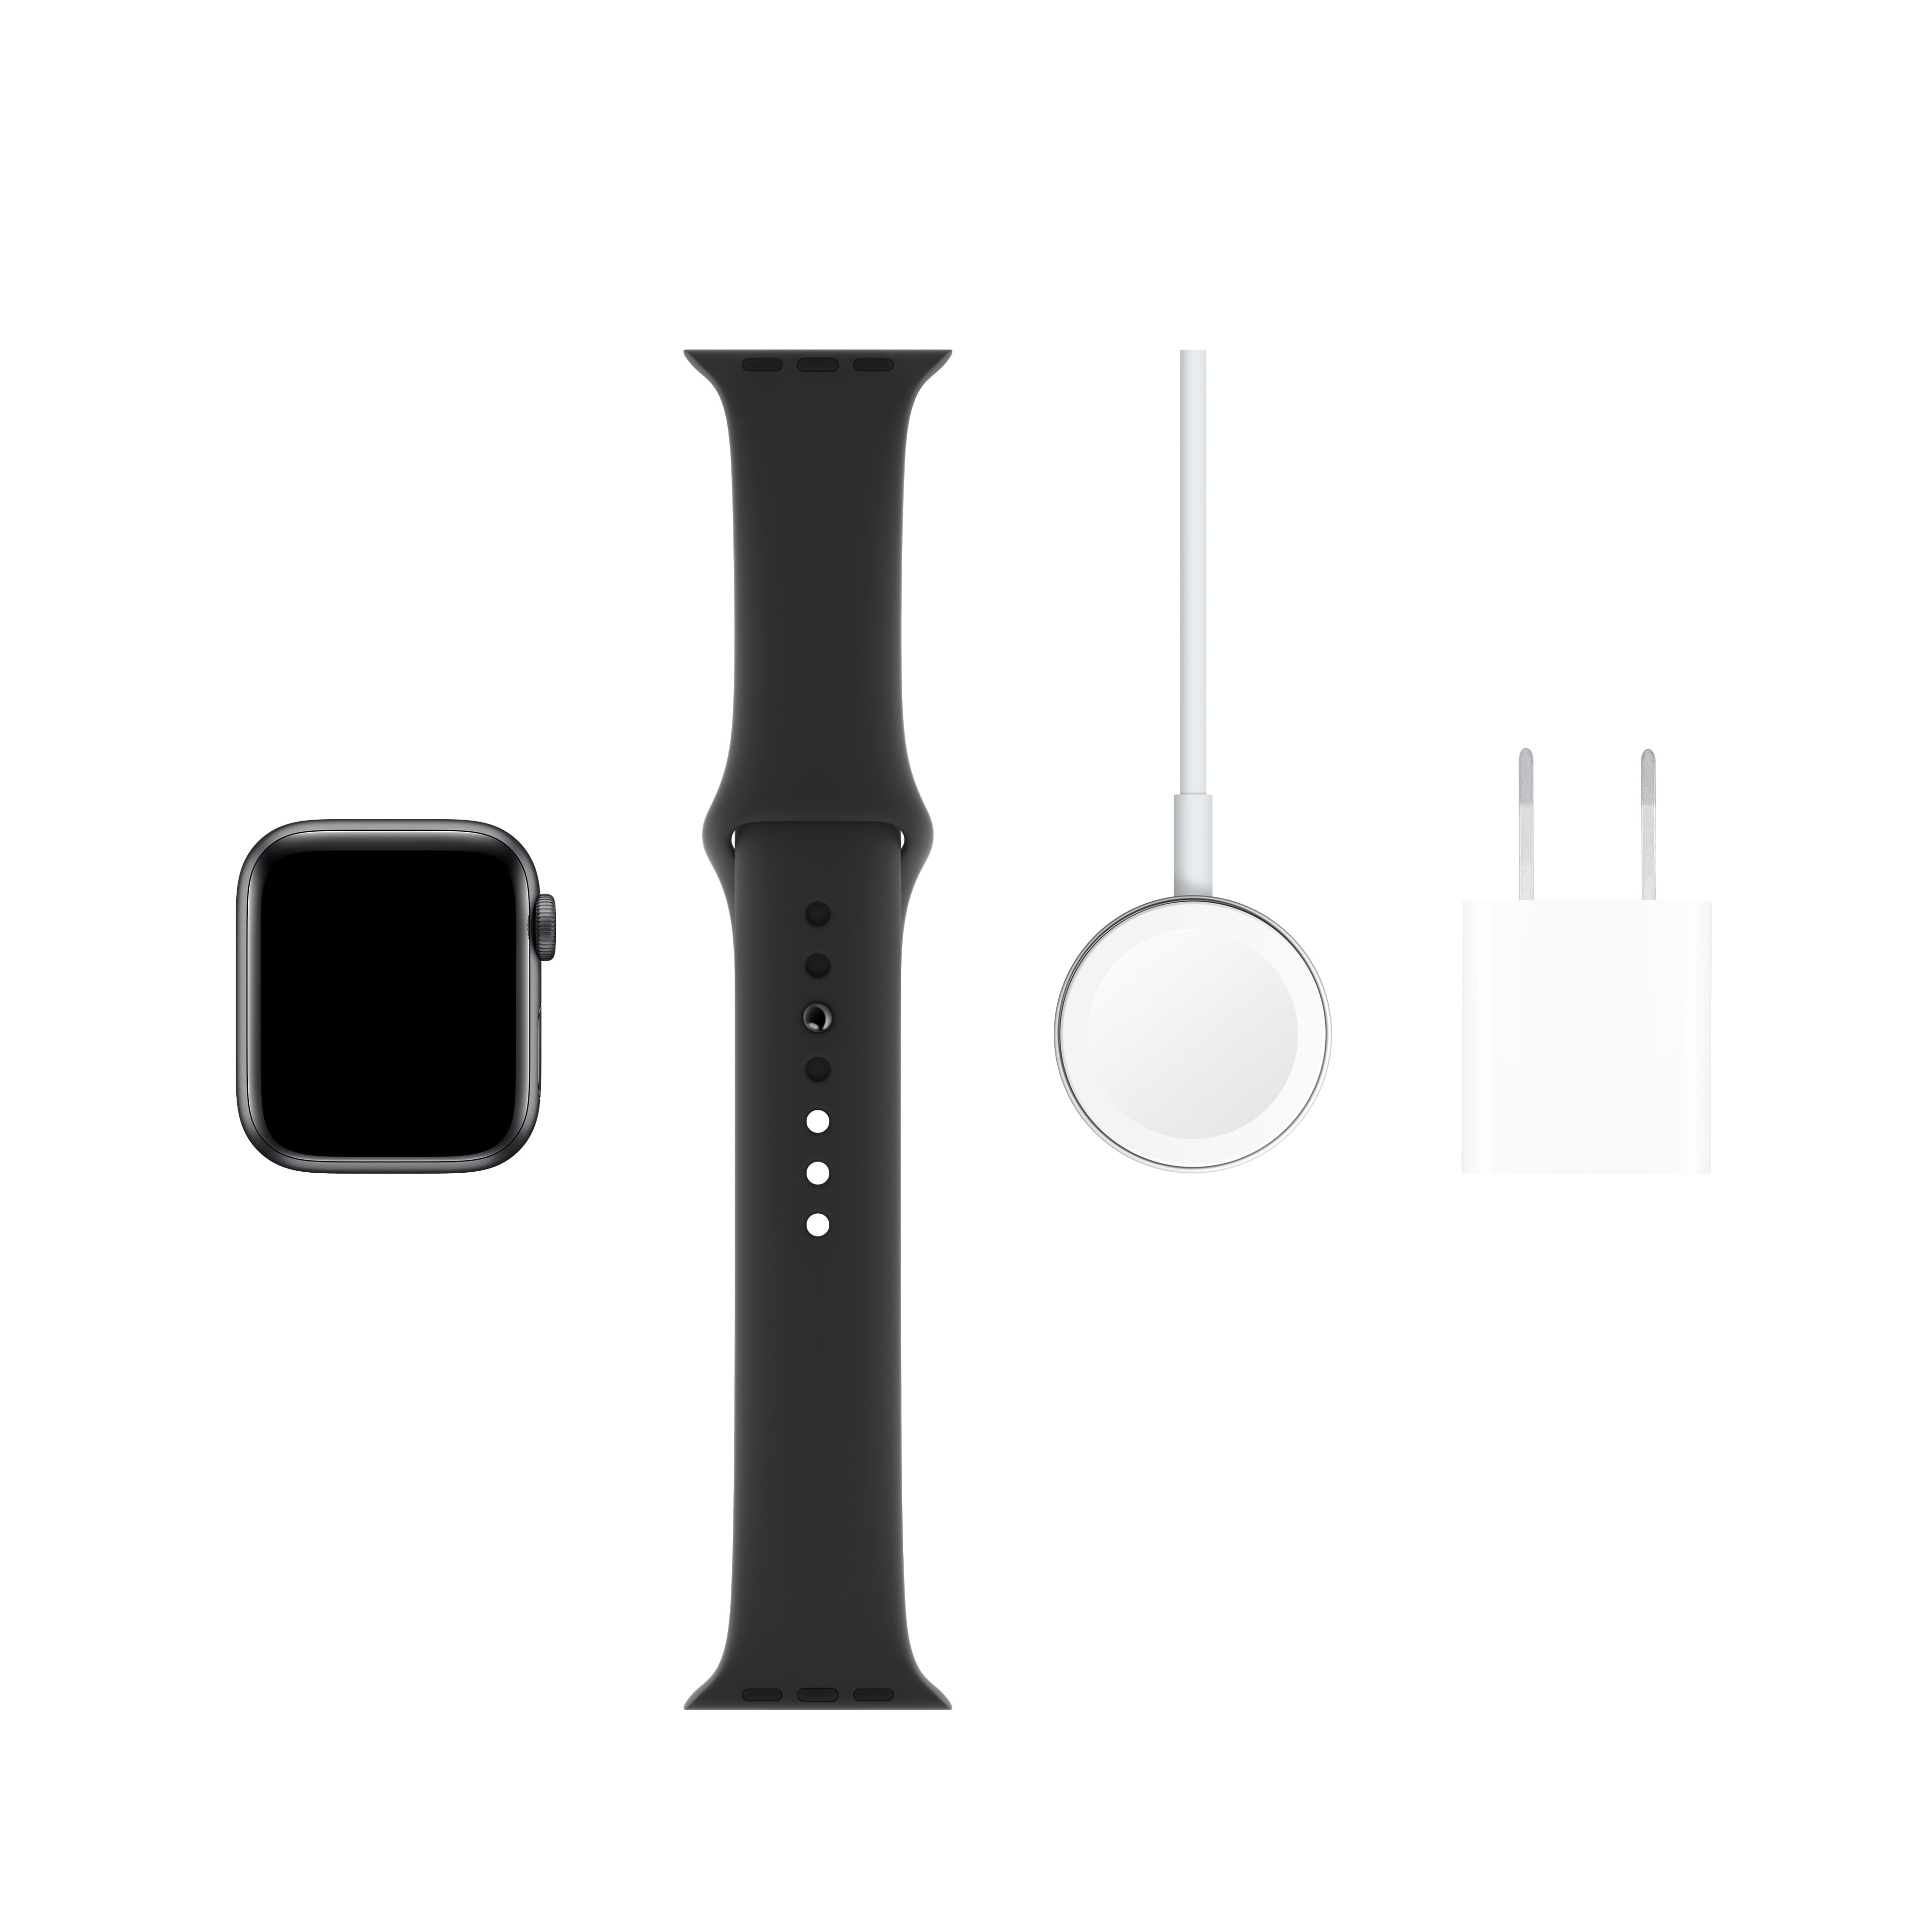 Apple Watch Series 5 GPS + Cellular, 40mm Space Gray Aluminum Case 